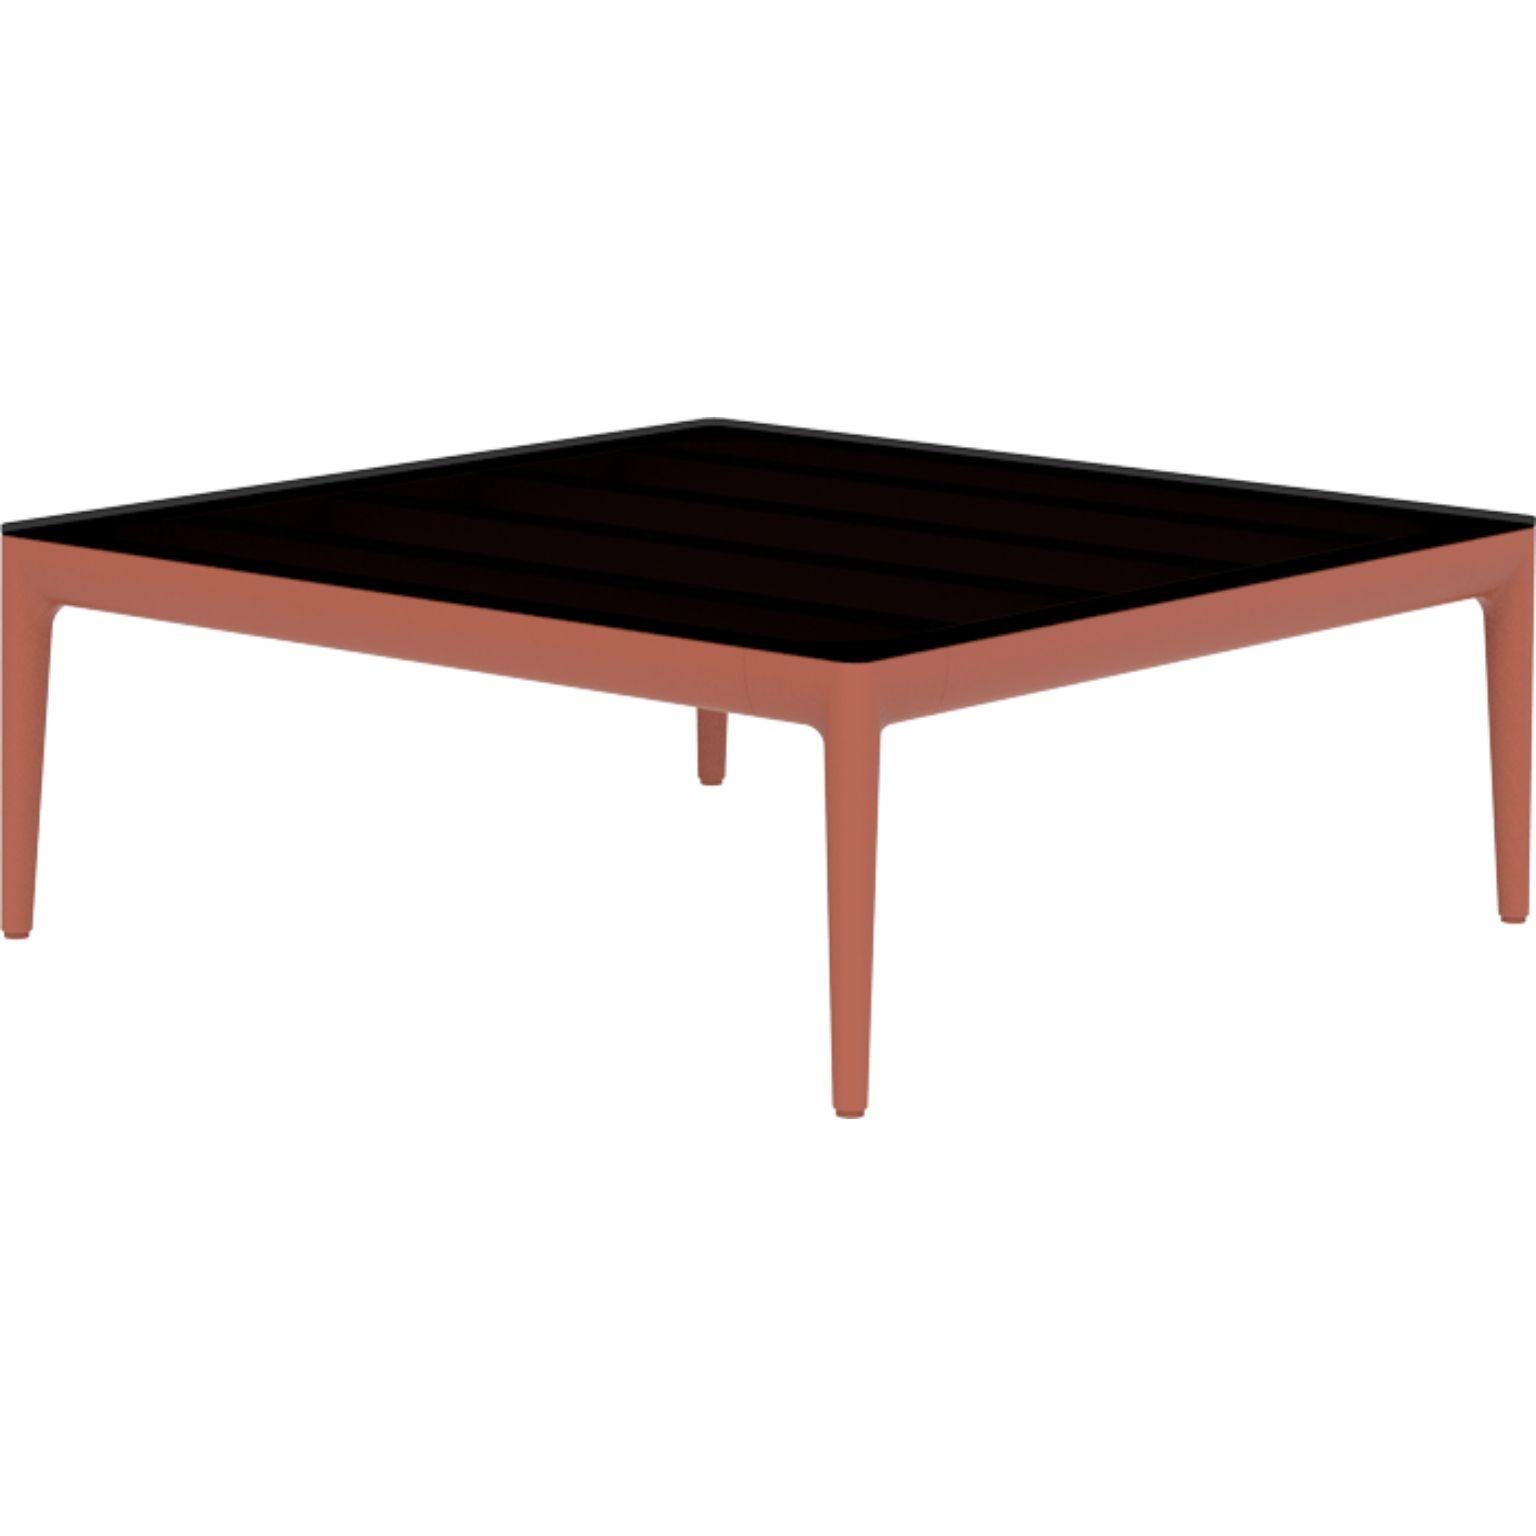 Ribbons Salmon 76 coffee table by MOWEE
Dimensions: D76 x W76 x H29 cm
Material: Aluminum and HPL top.
Weight: 12 kg.
Also available in different colors and finishes. (HPL Black Edge or Neolith top). 

An unmistakable collection for its beauty